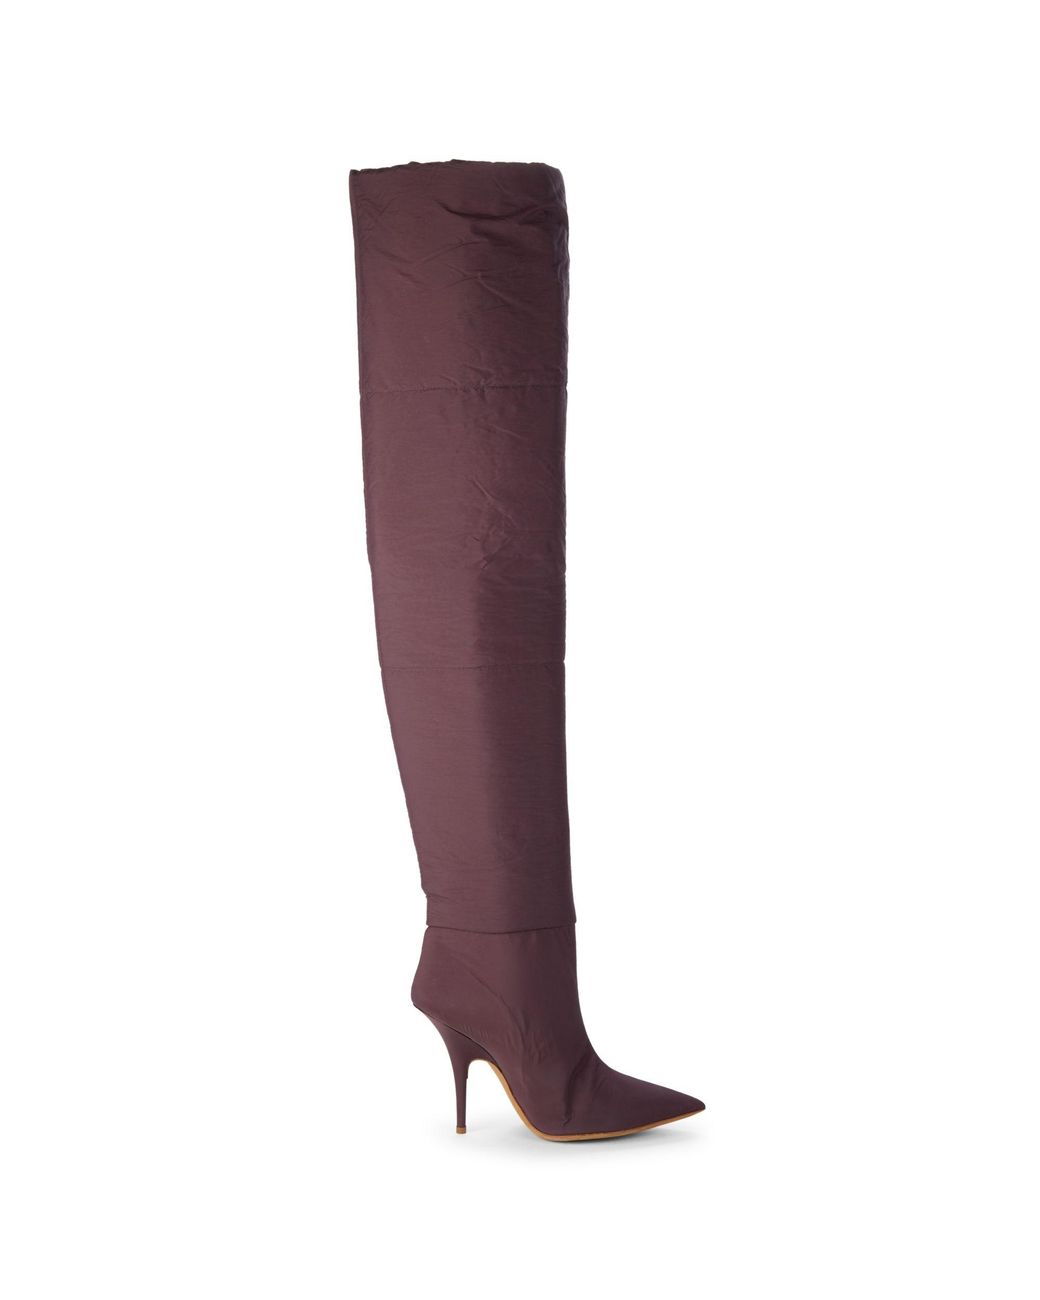 Yeezy Leather Tubular Over-the-knee Boots in Oxblood (Purple) - Lyst